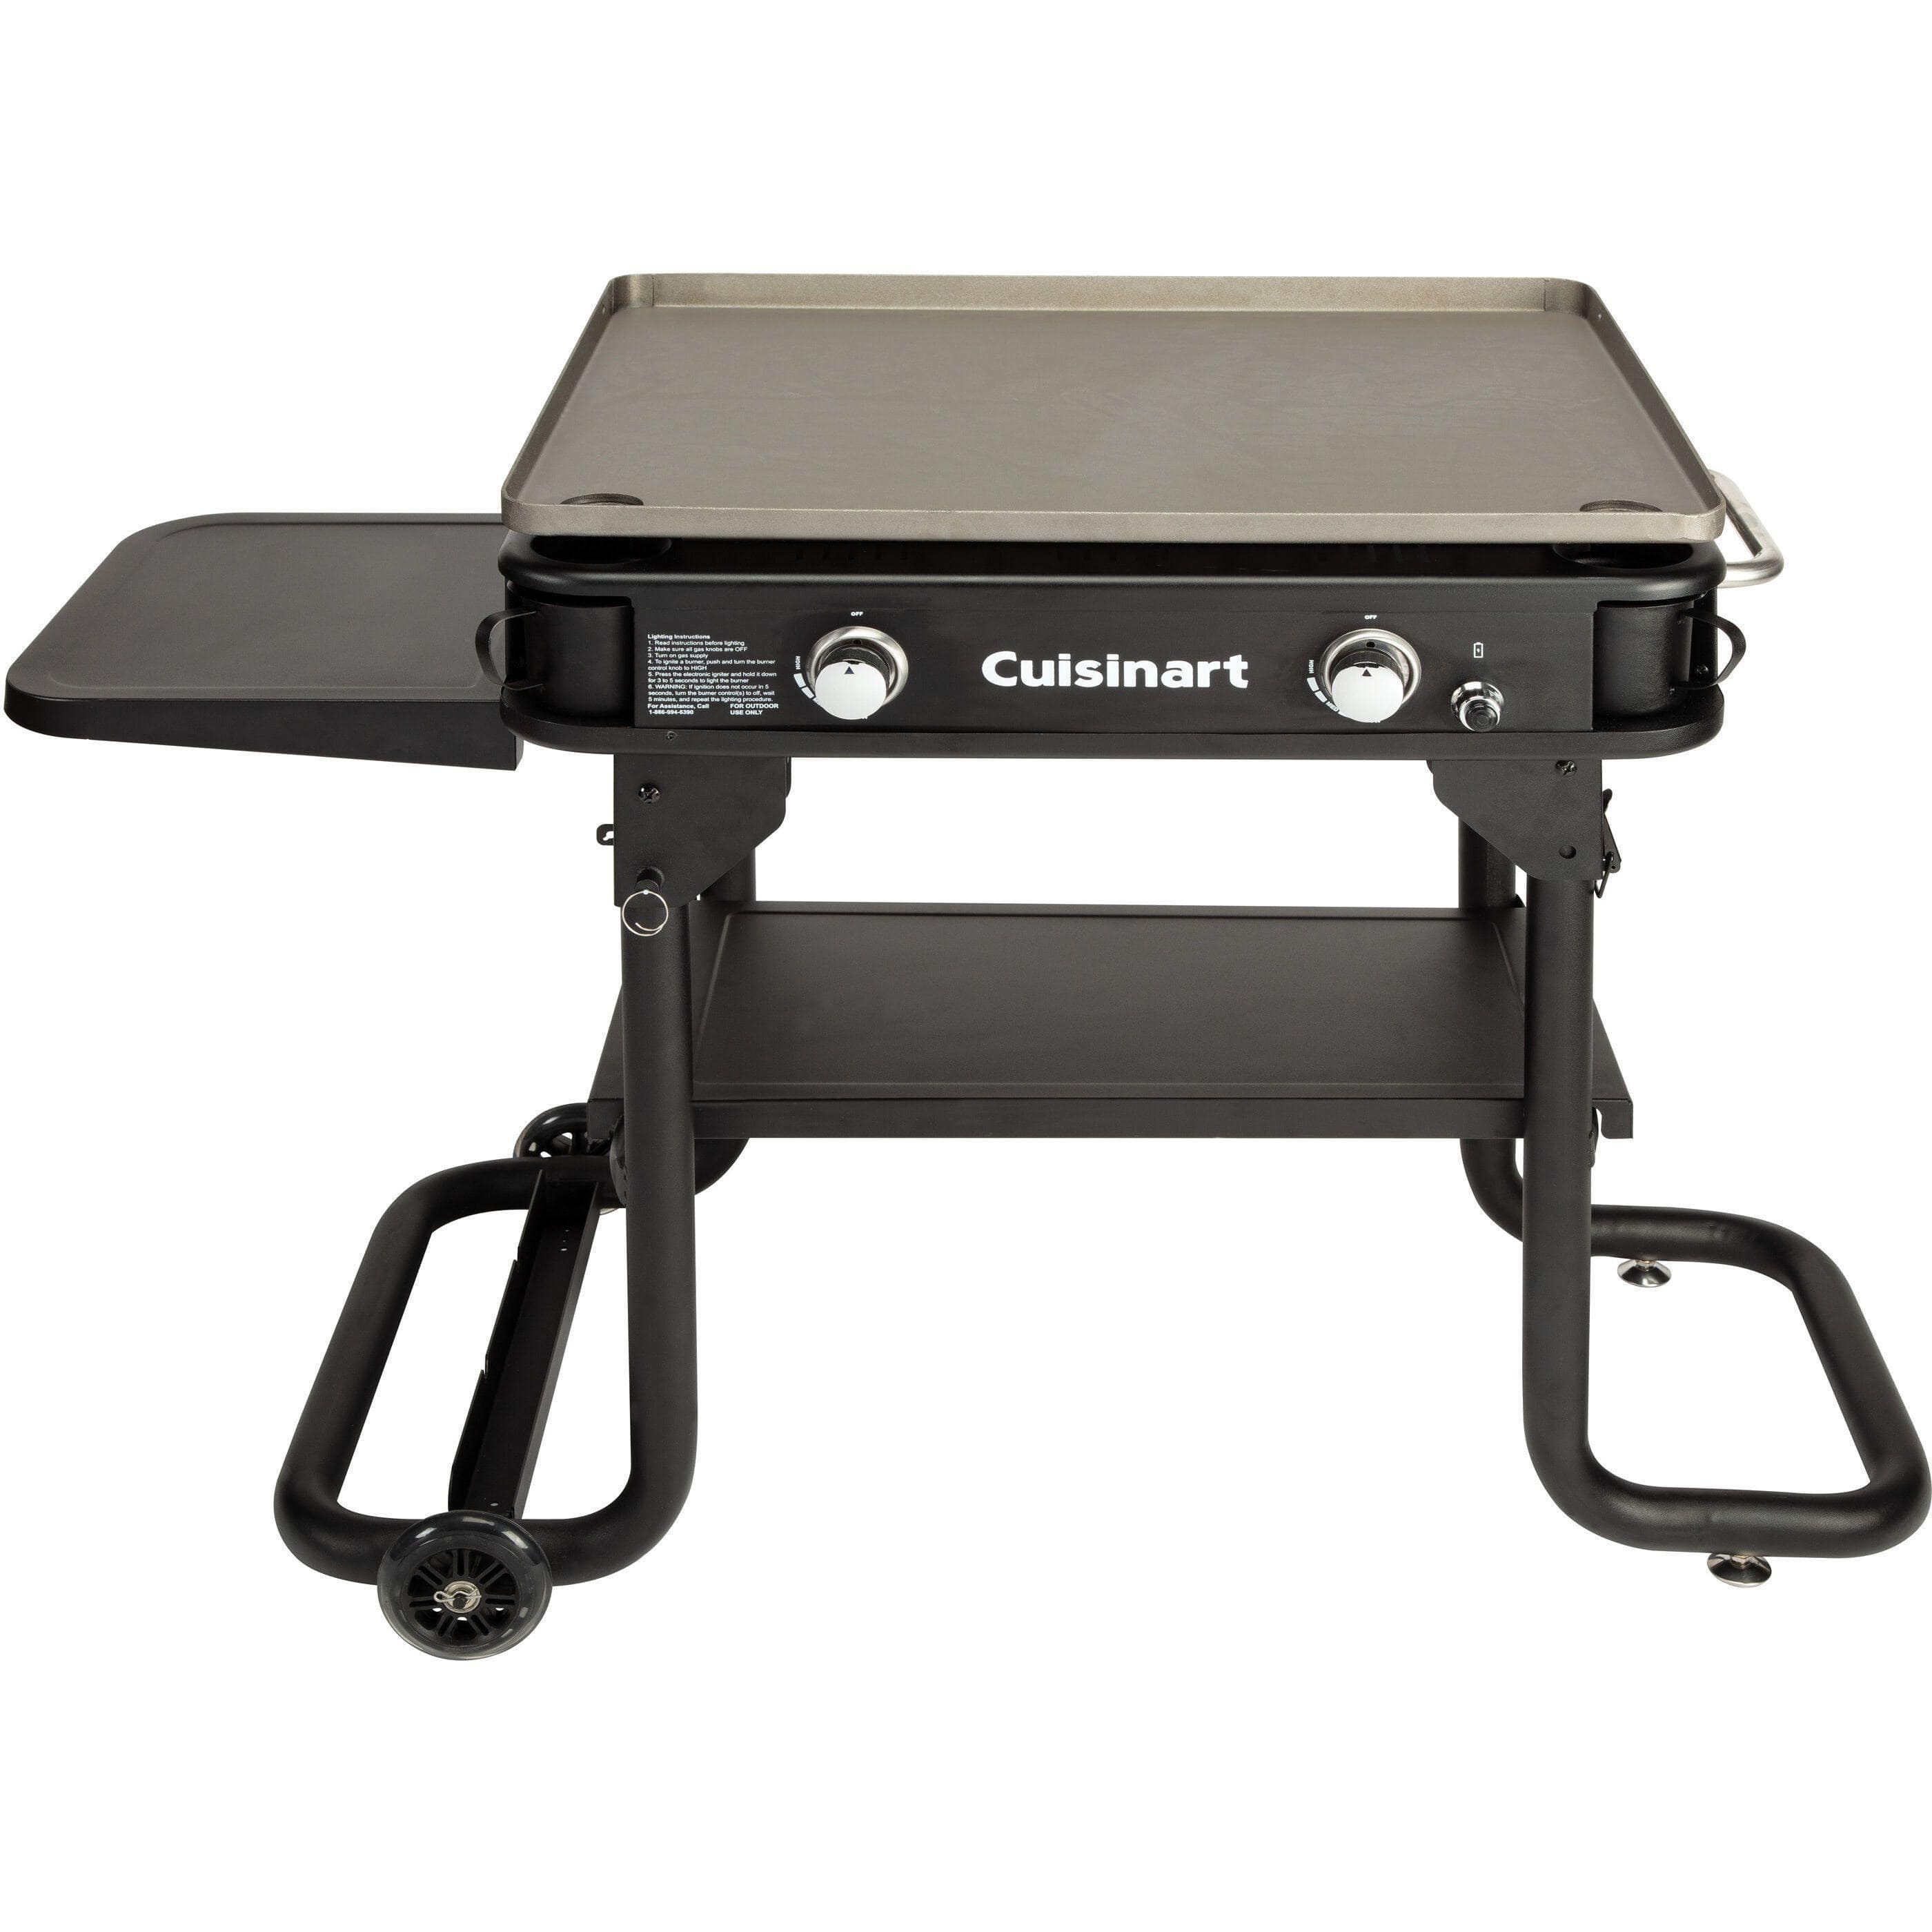 Cuisinart Cuisinart 28-In. Outdoor Gas Griddle Folds Flat for Tabletop and Tailgate Use